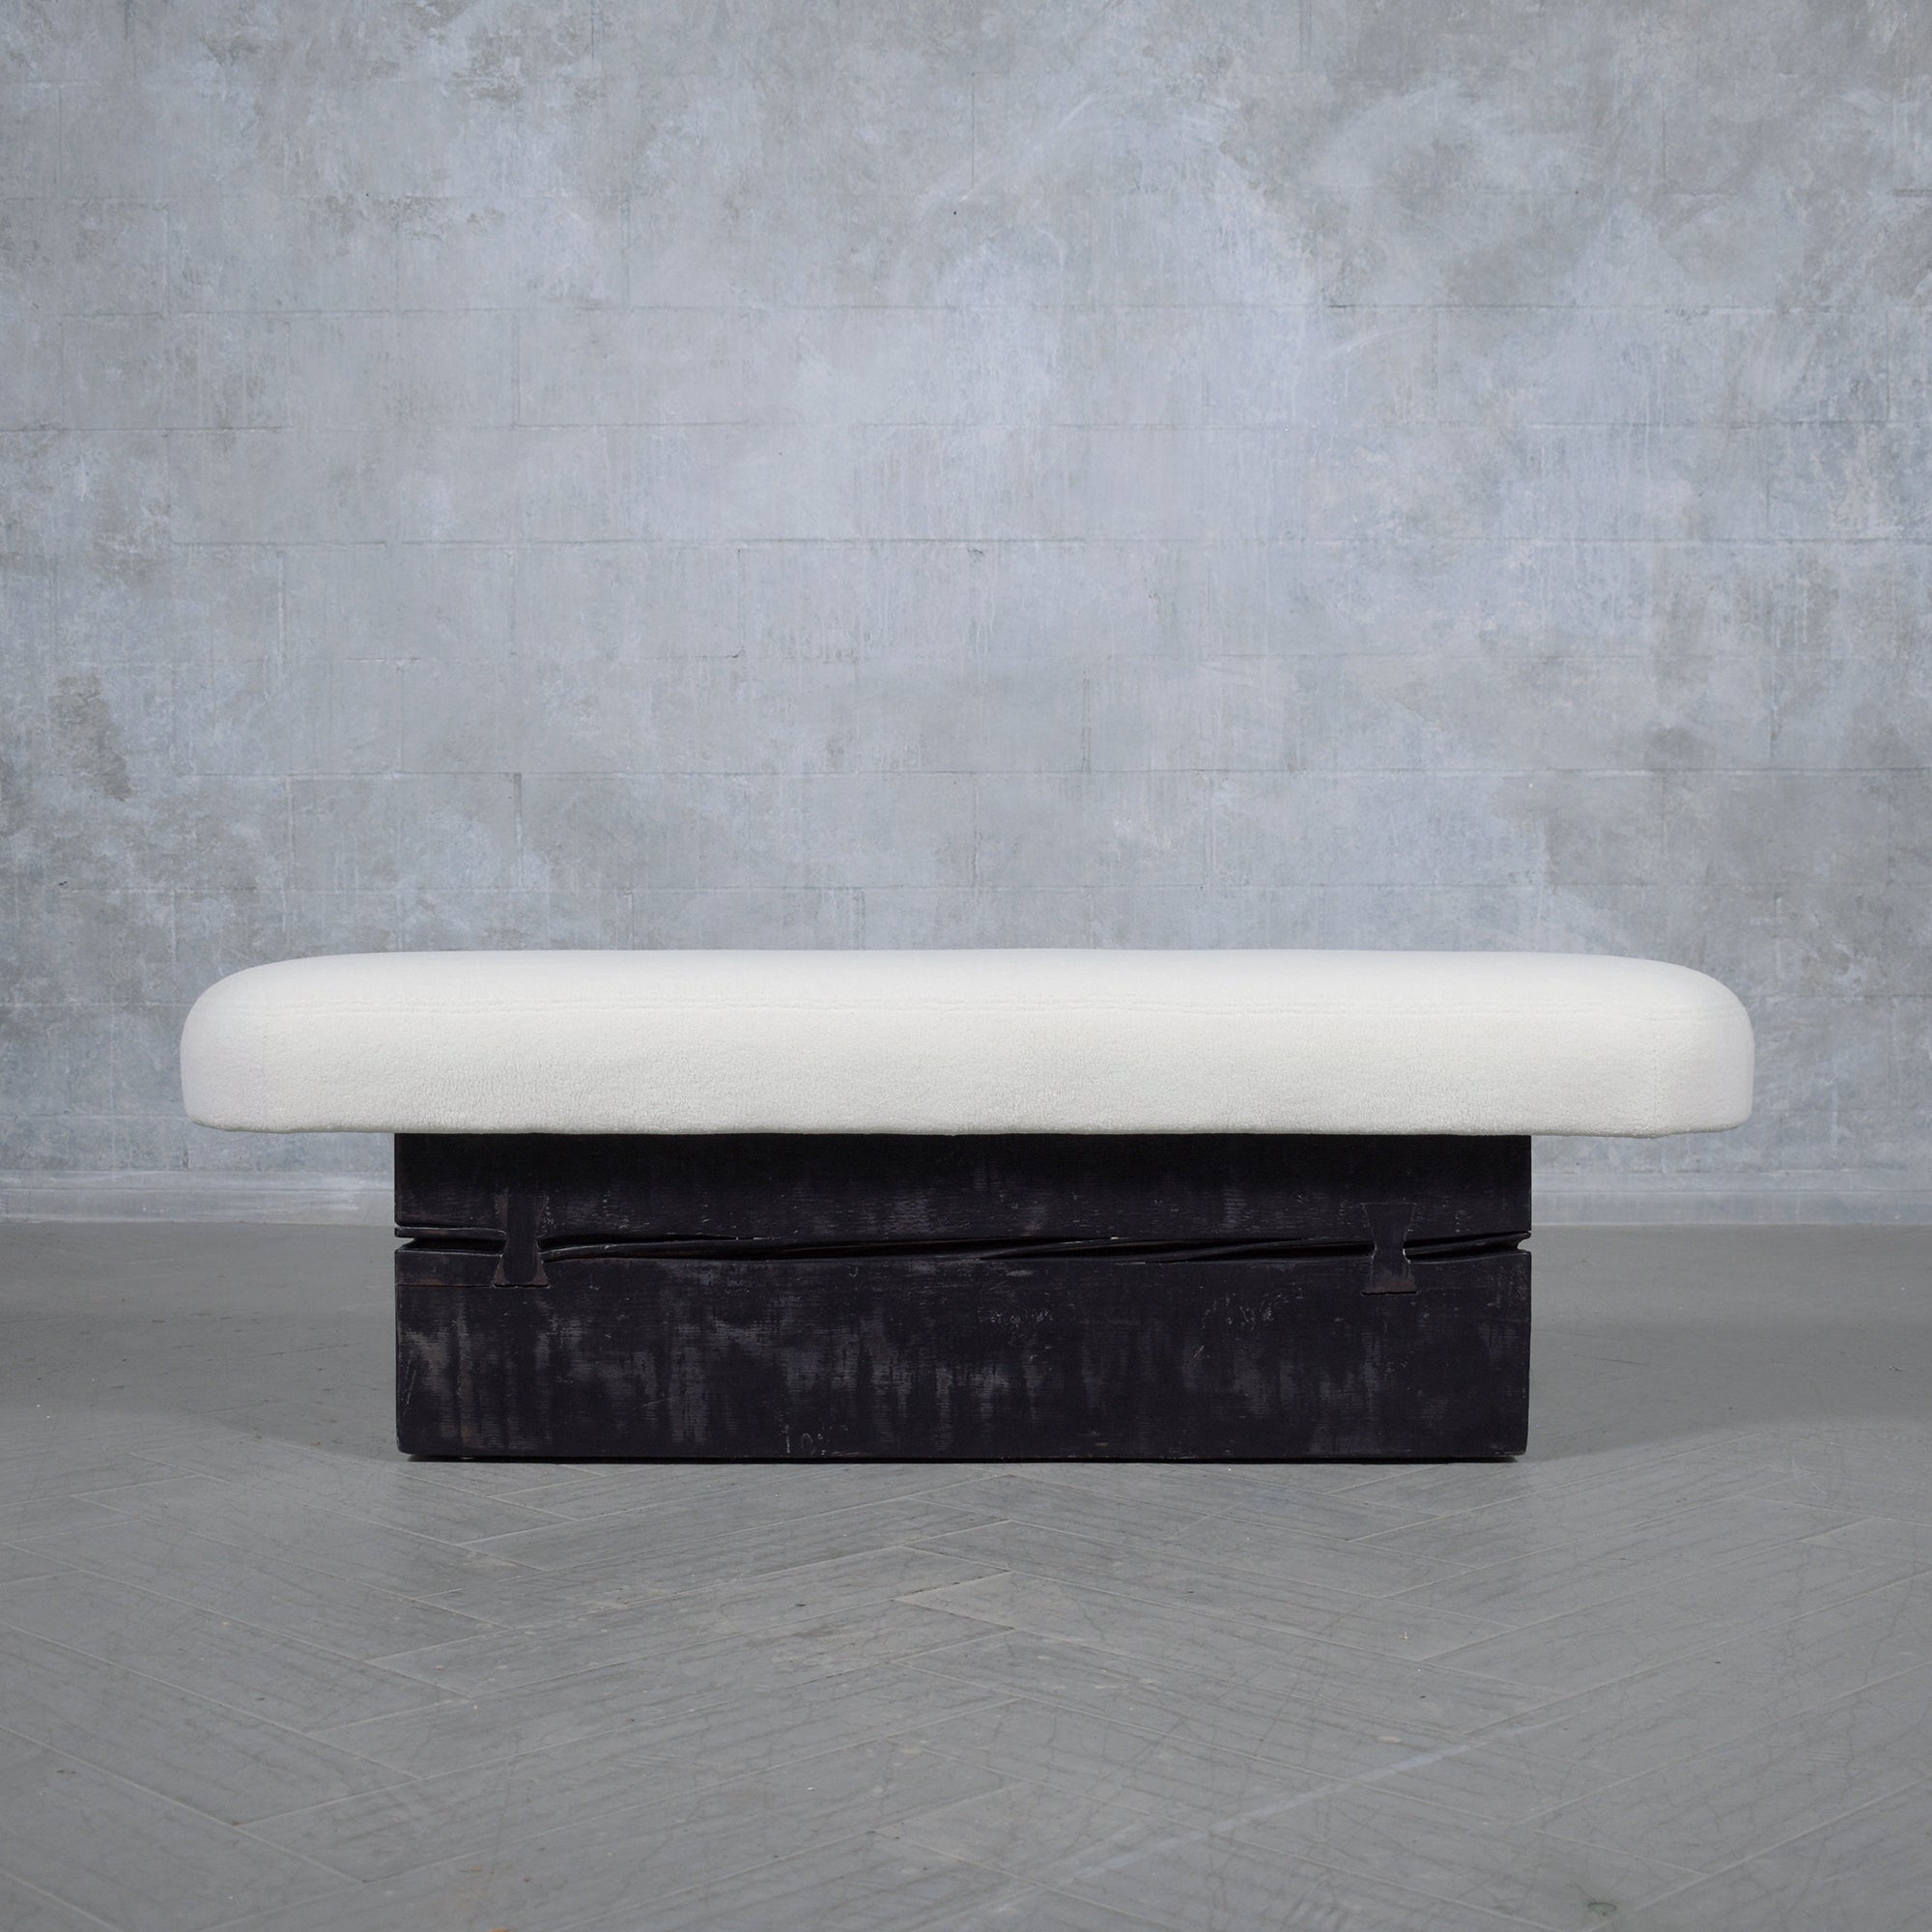 Discover the epitome of elegance and comfort with our beautifully restored modern slab bench. Masterfully crafted from solid wood, this bench is a testament to the meticulous craftsmanship and attention to detail inherent in every aspect of its